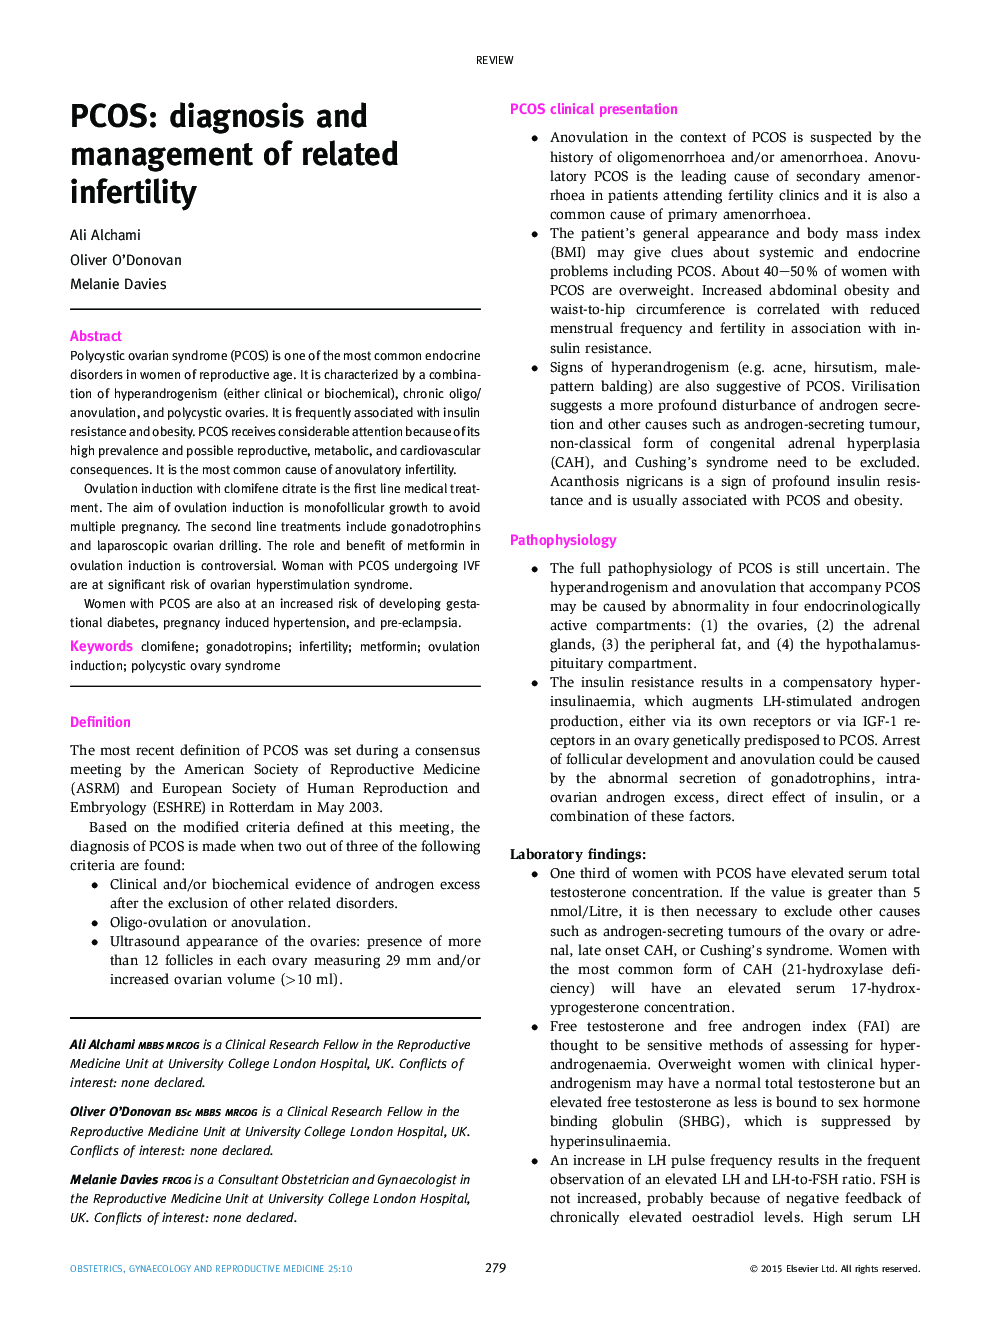 PCOS: diagnosis and management of related infertility